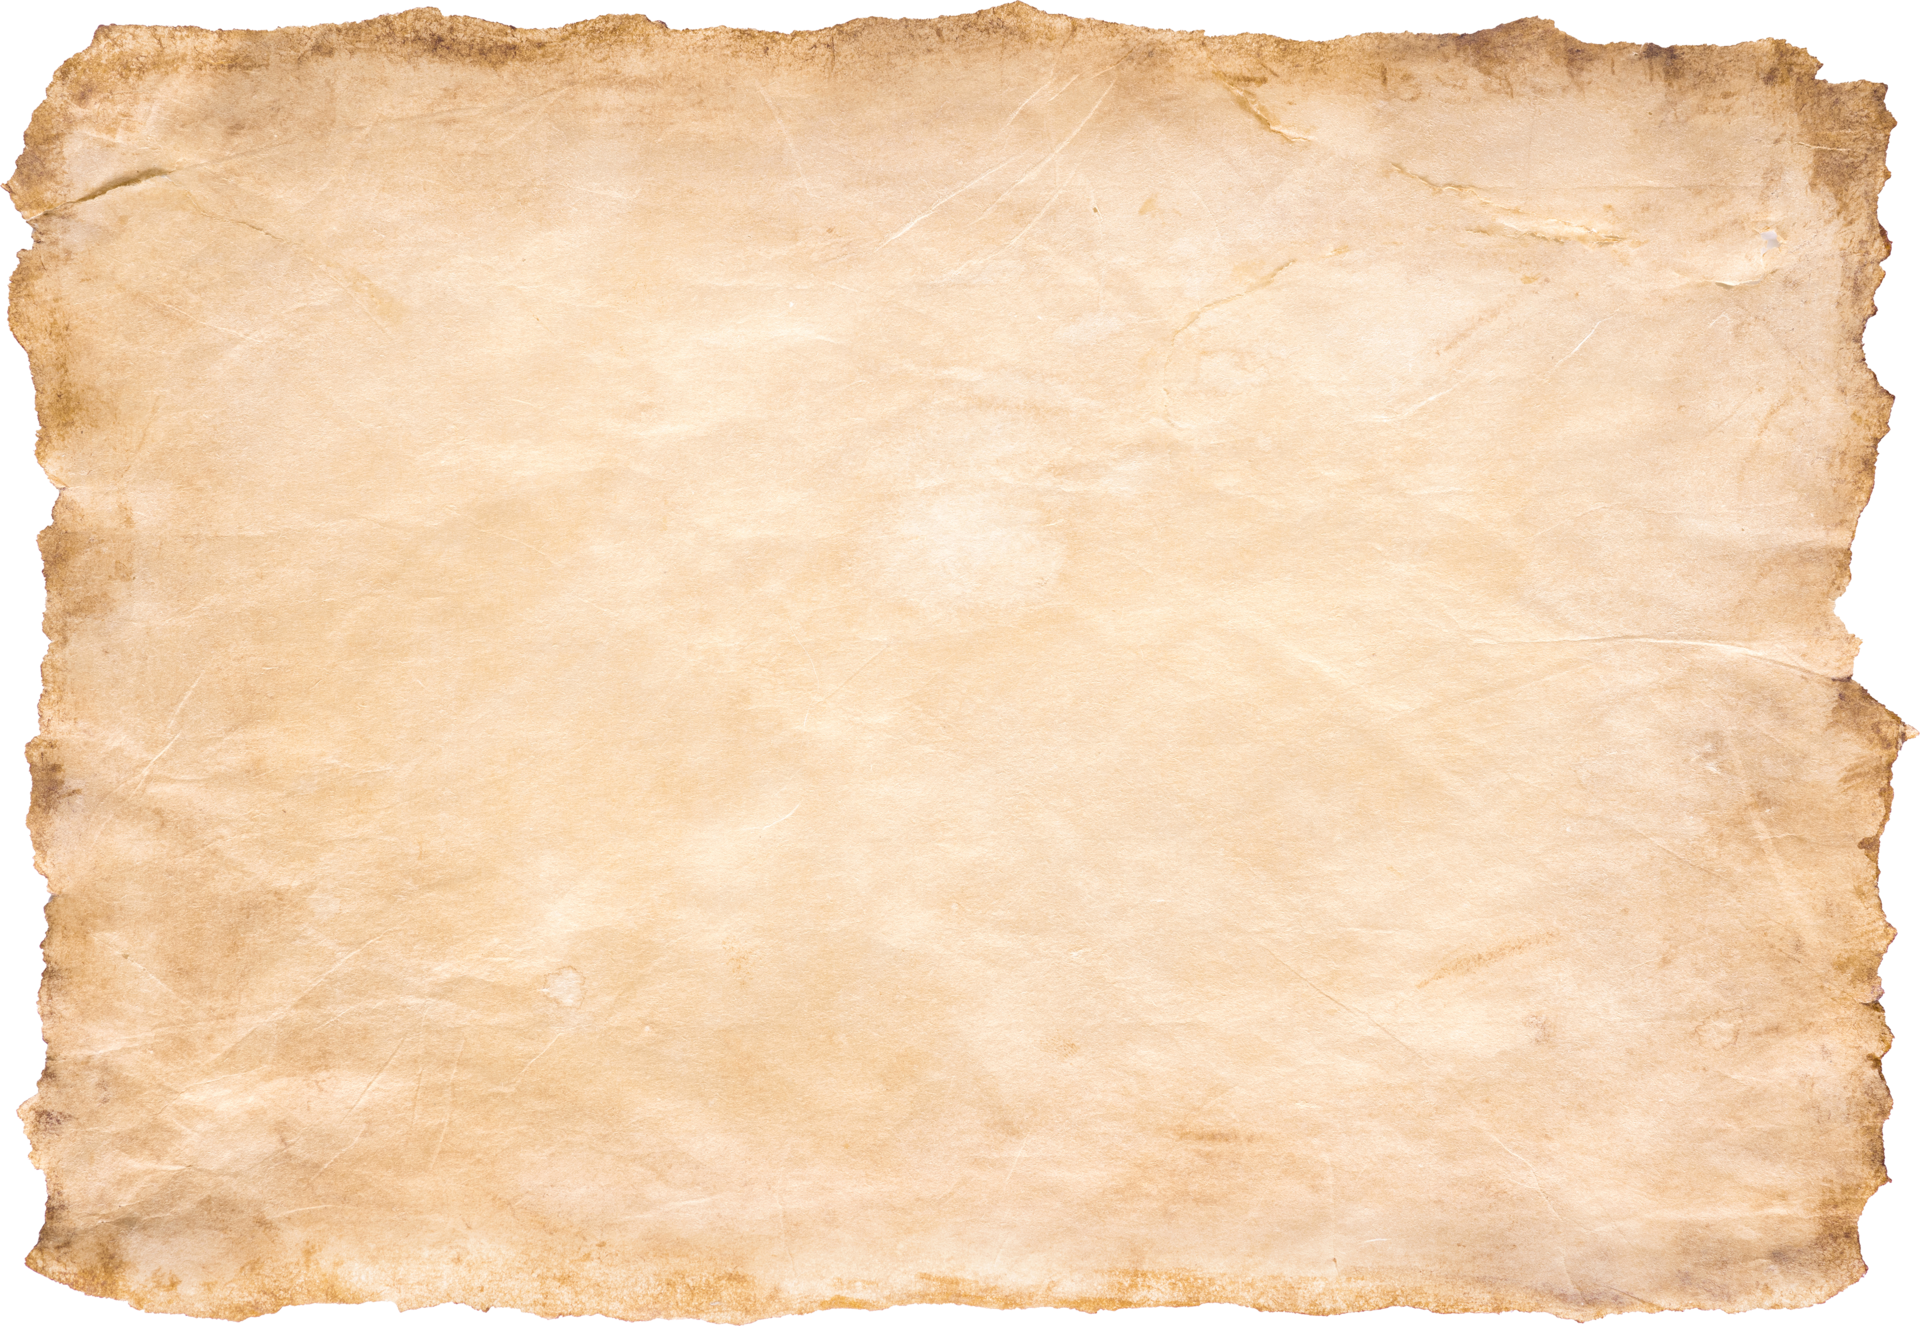 https://static.vecteezy.com/system/resources/previews/012/981/822/original/old-parchment-paper-sheet-vintage-aged-or-texture-background-png.png